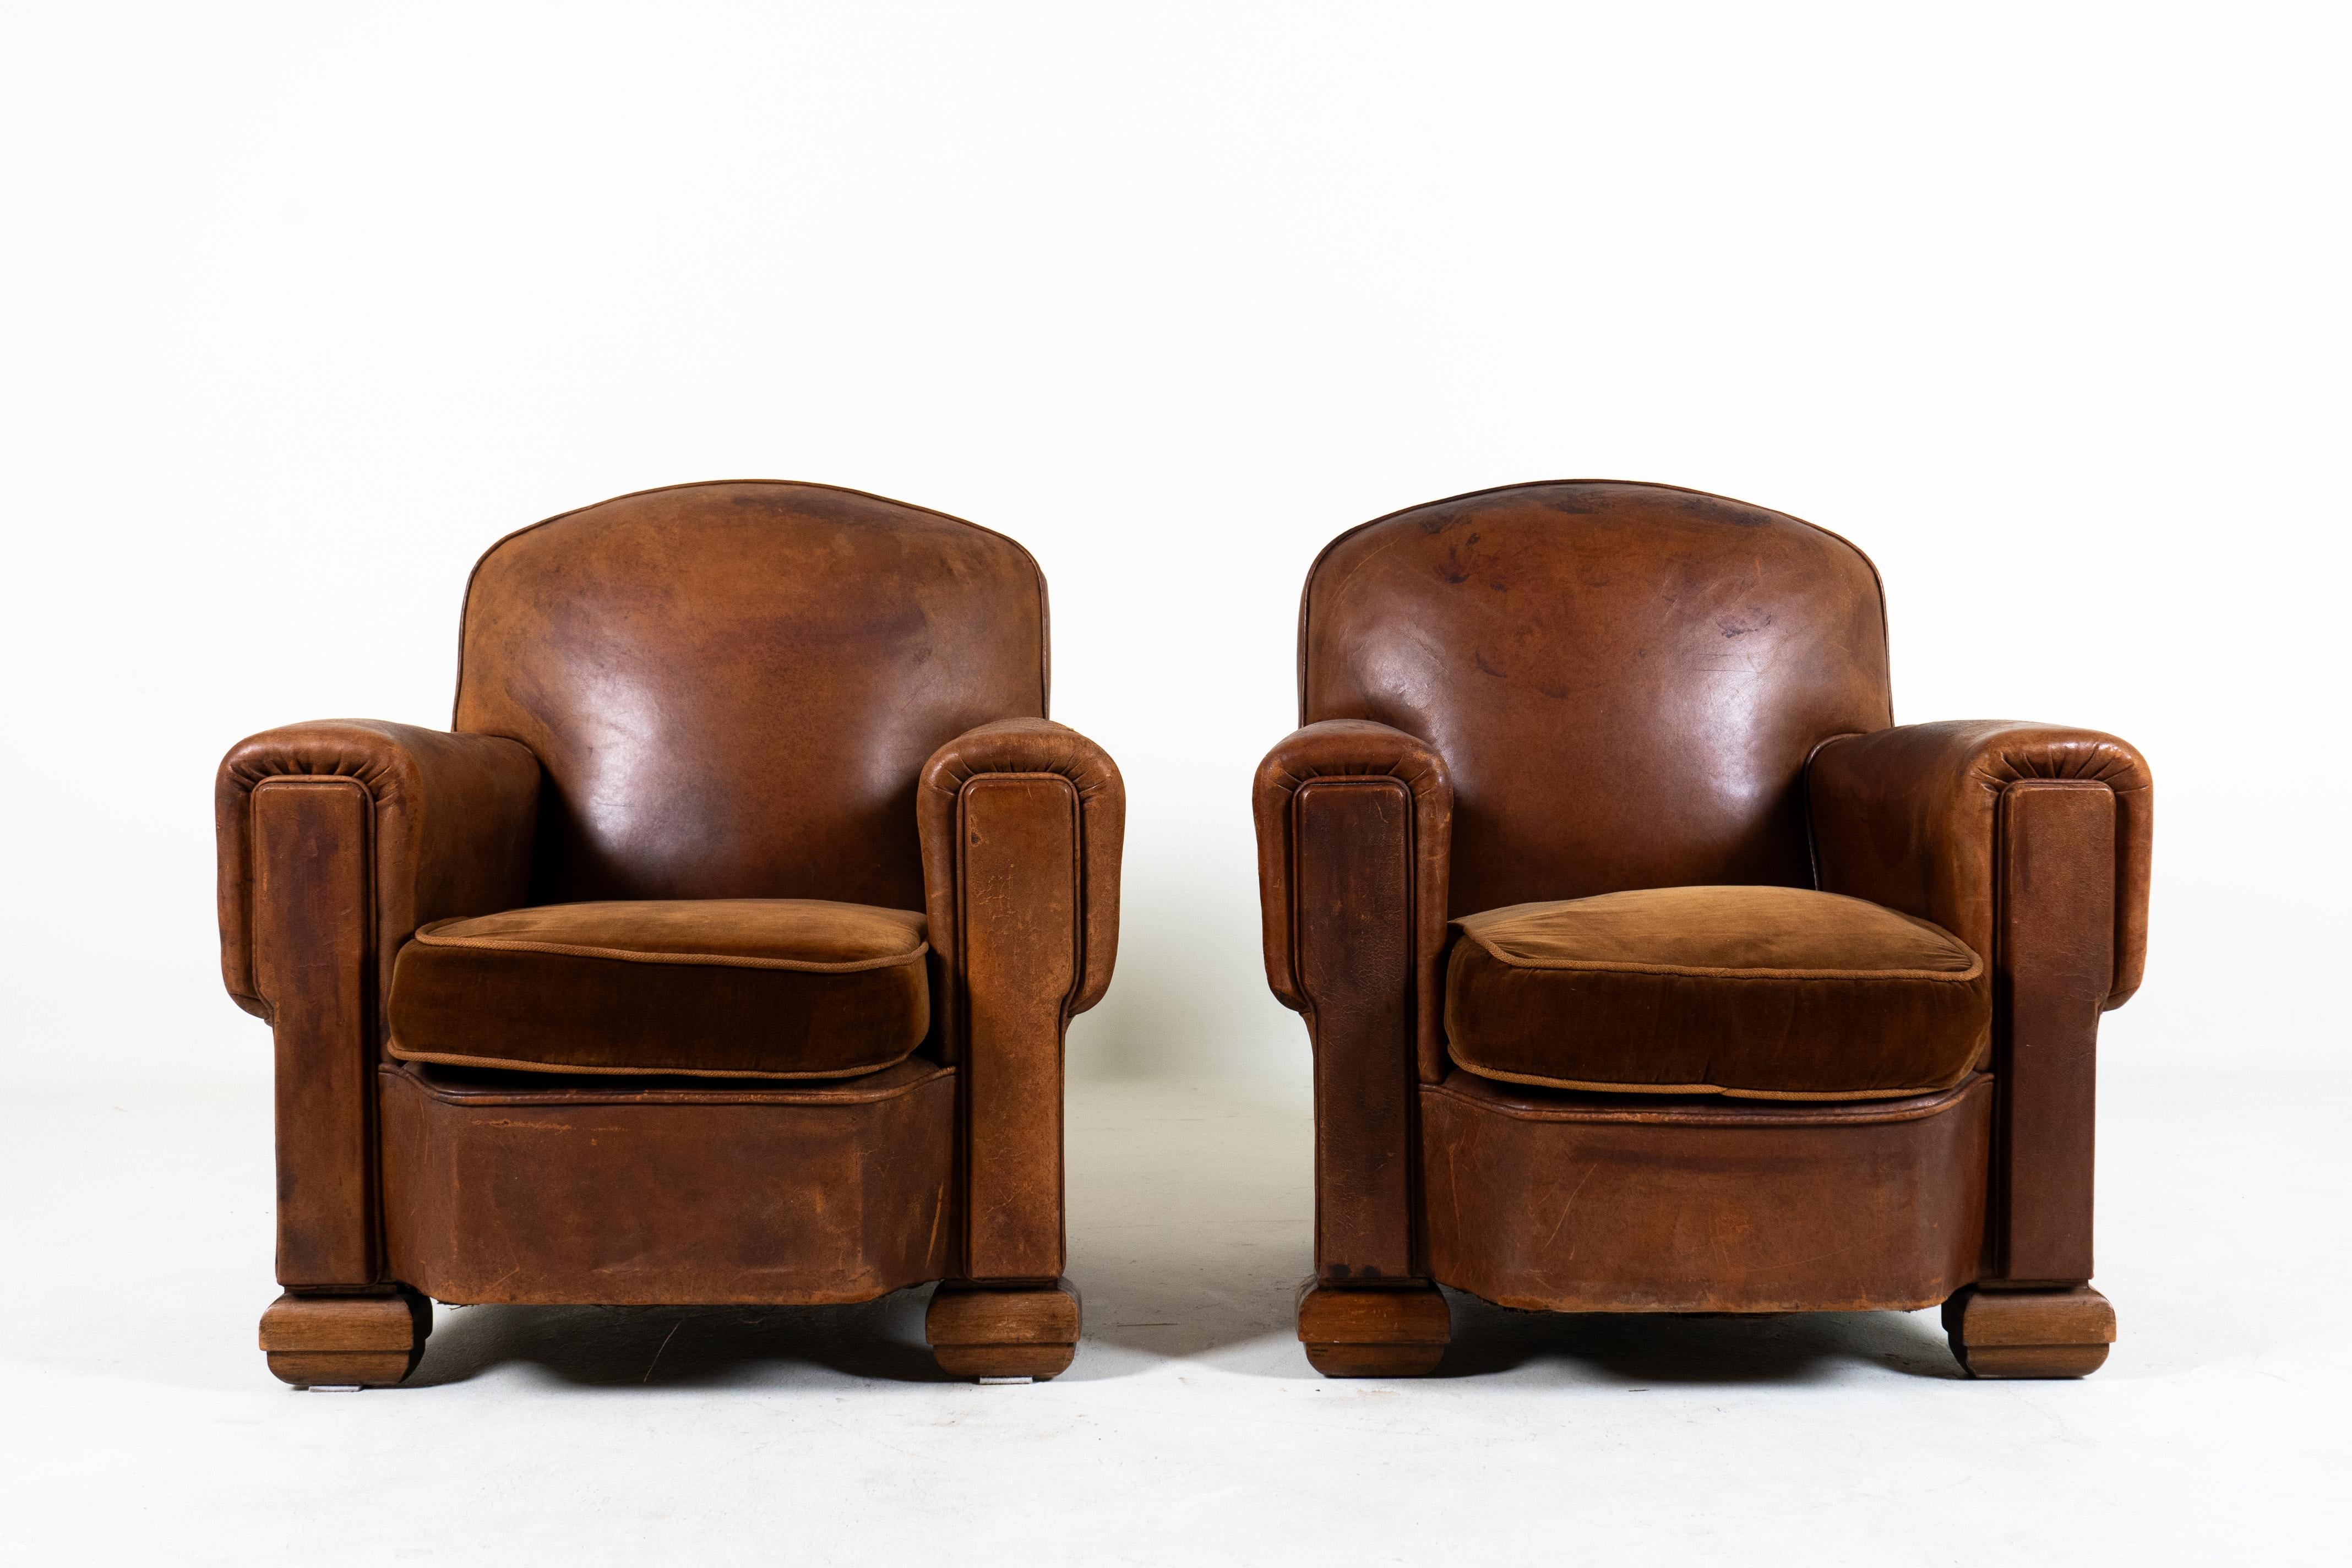 This pair of vintage French Art Deco club chairs date to the end of the era. With a design reaching back to the Art Deco period of the 1920s-1940s, these chairs represent the simplified and streamlined terminus of an era of Parisian elegance and